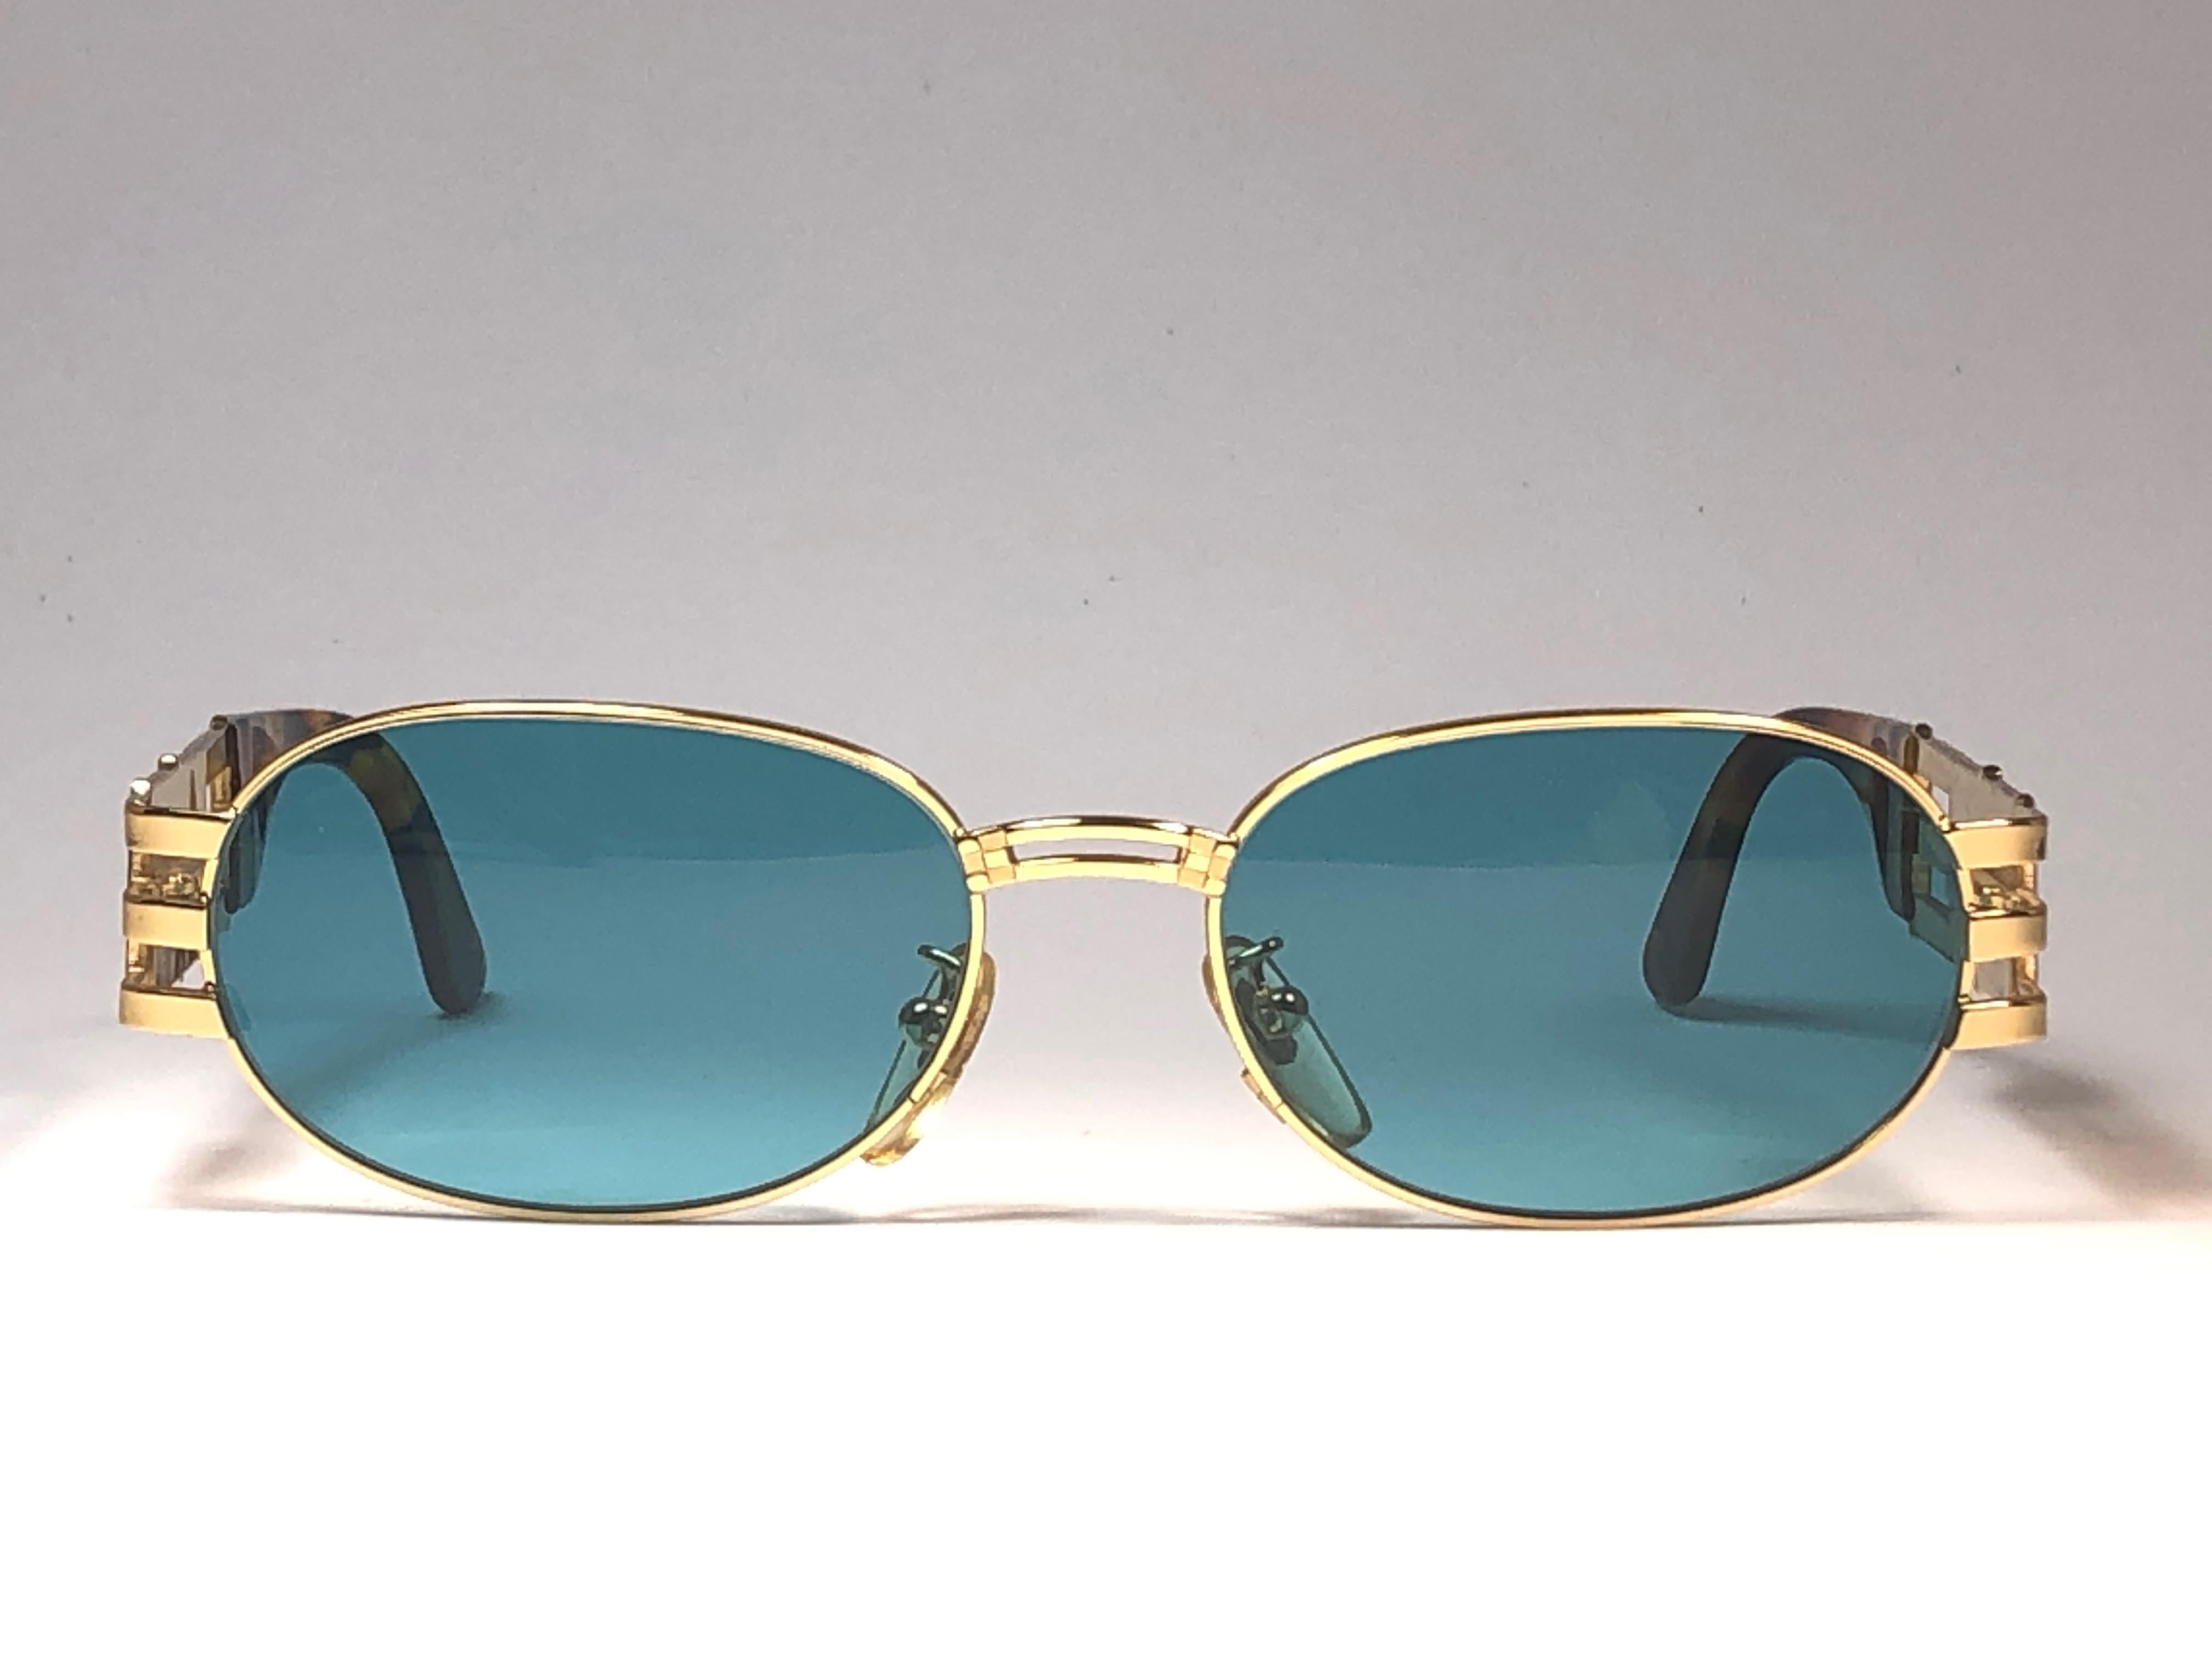 New Fendi gold oval frame with turquoise  ( UV protection ) lenses.

Made in Italy.
 
Produced and design in 1990's.

New, never worn or displayed. this  item may show minor sign of wear due to storage.